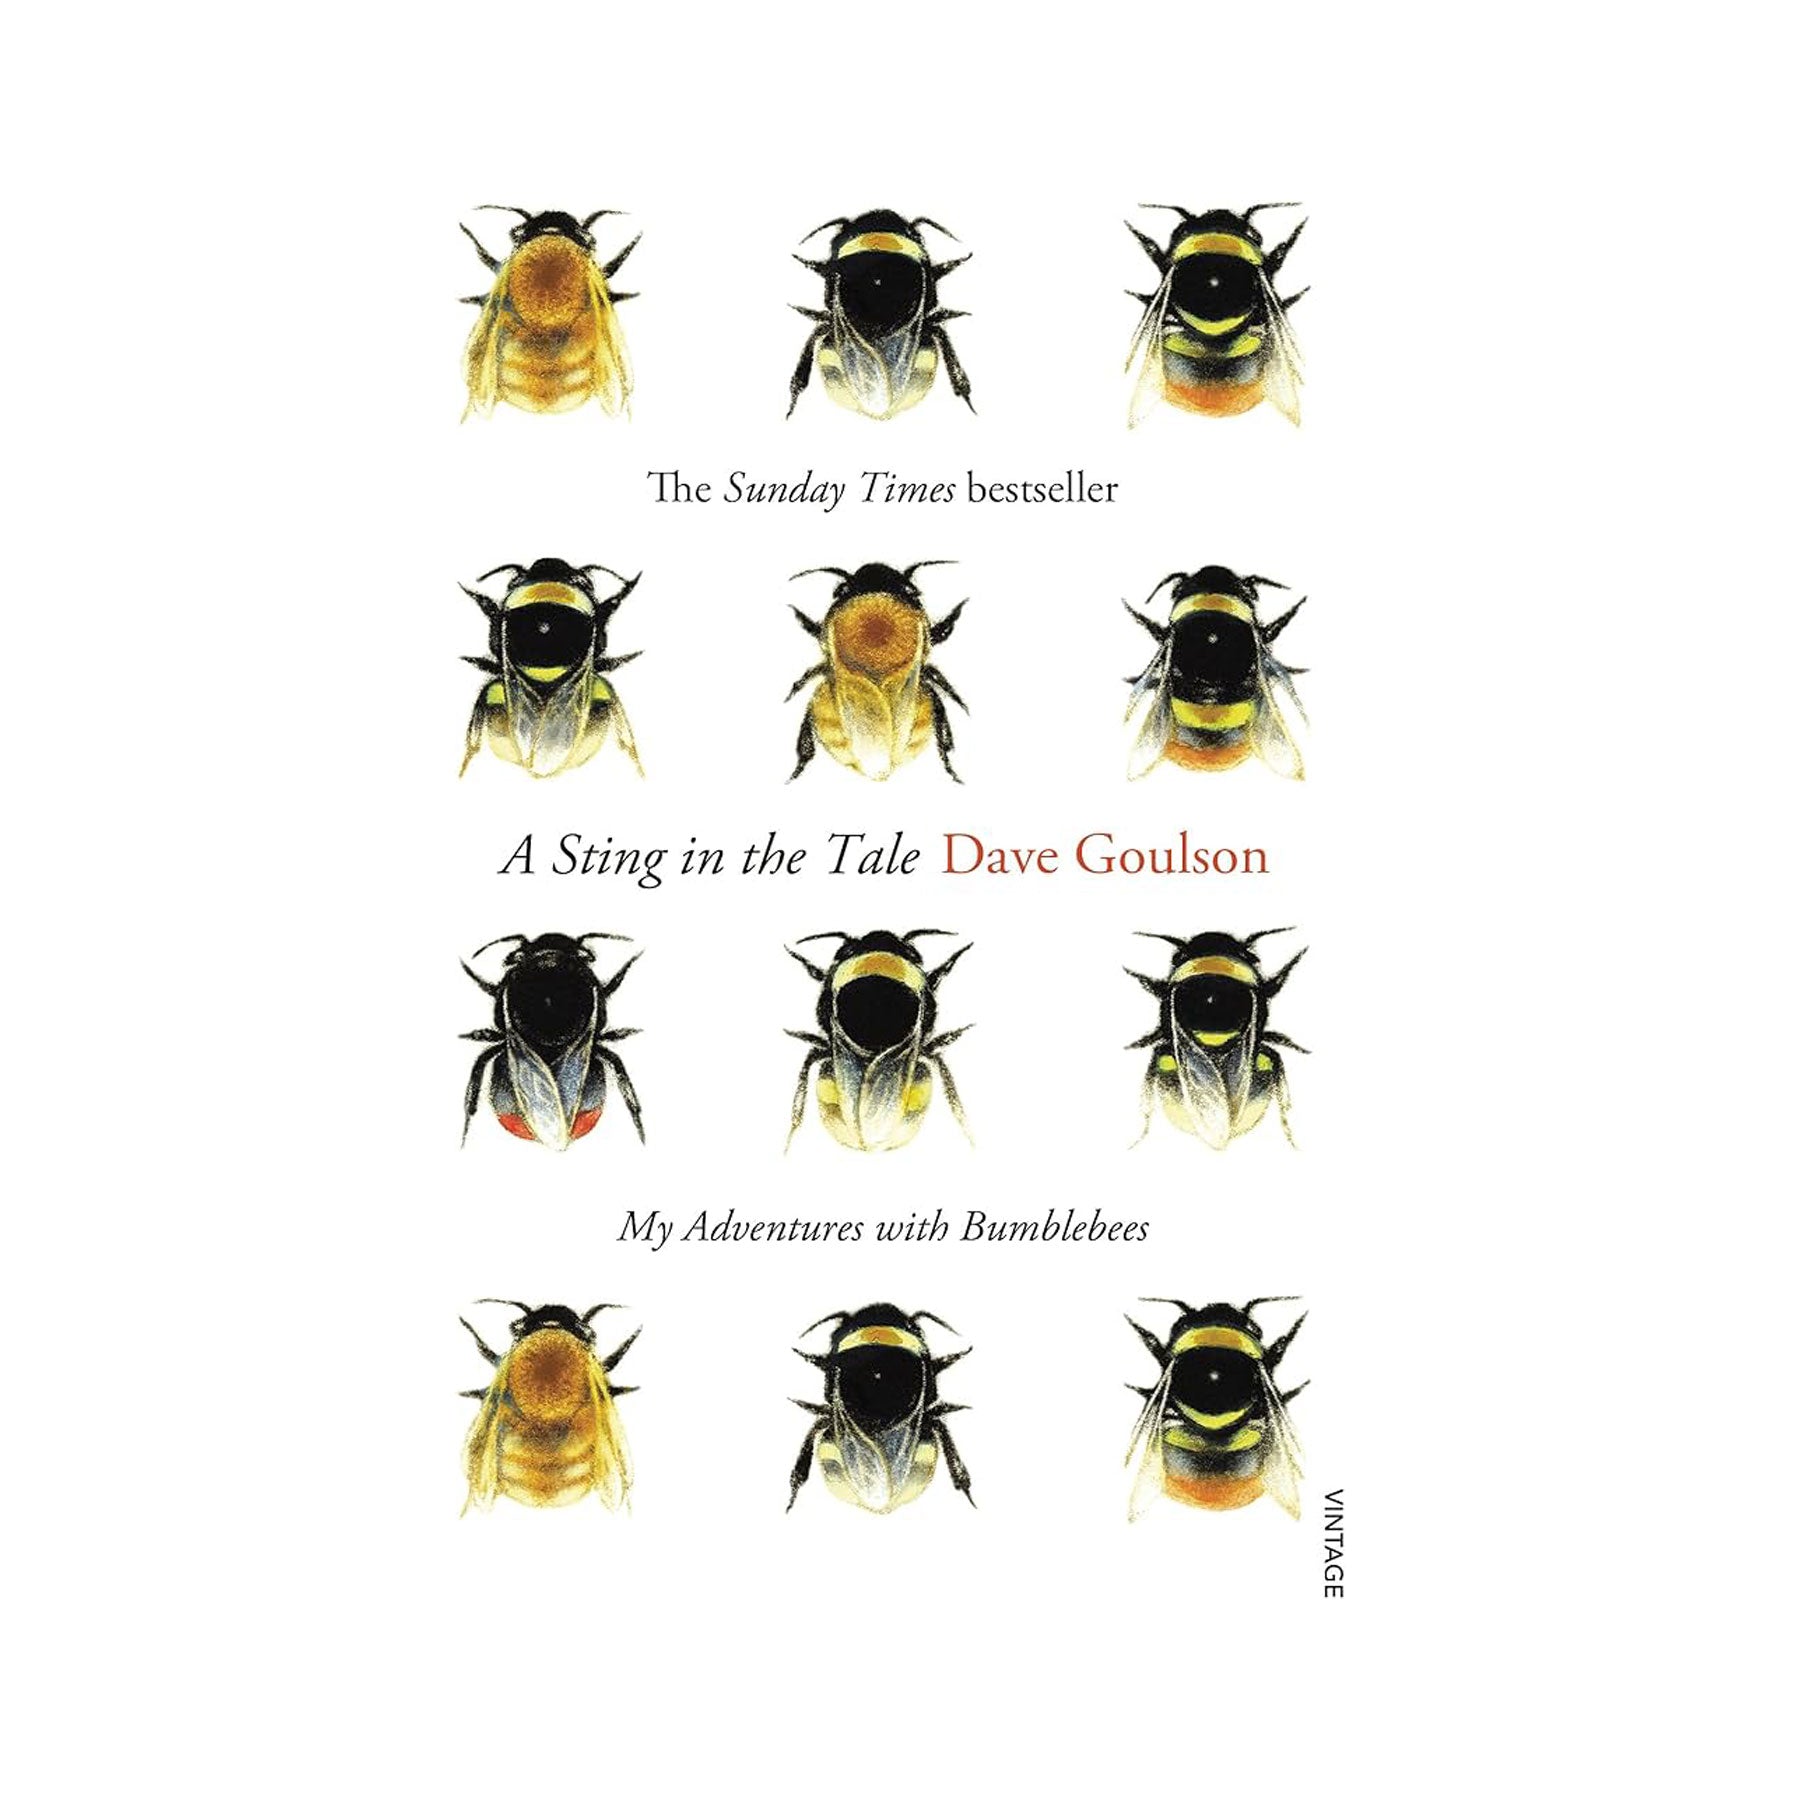 A Sting in the Tale, My Adventures with Bumblebees